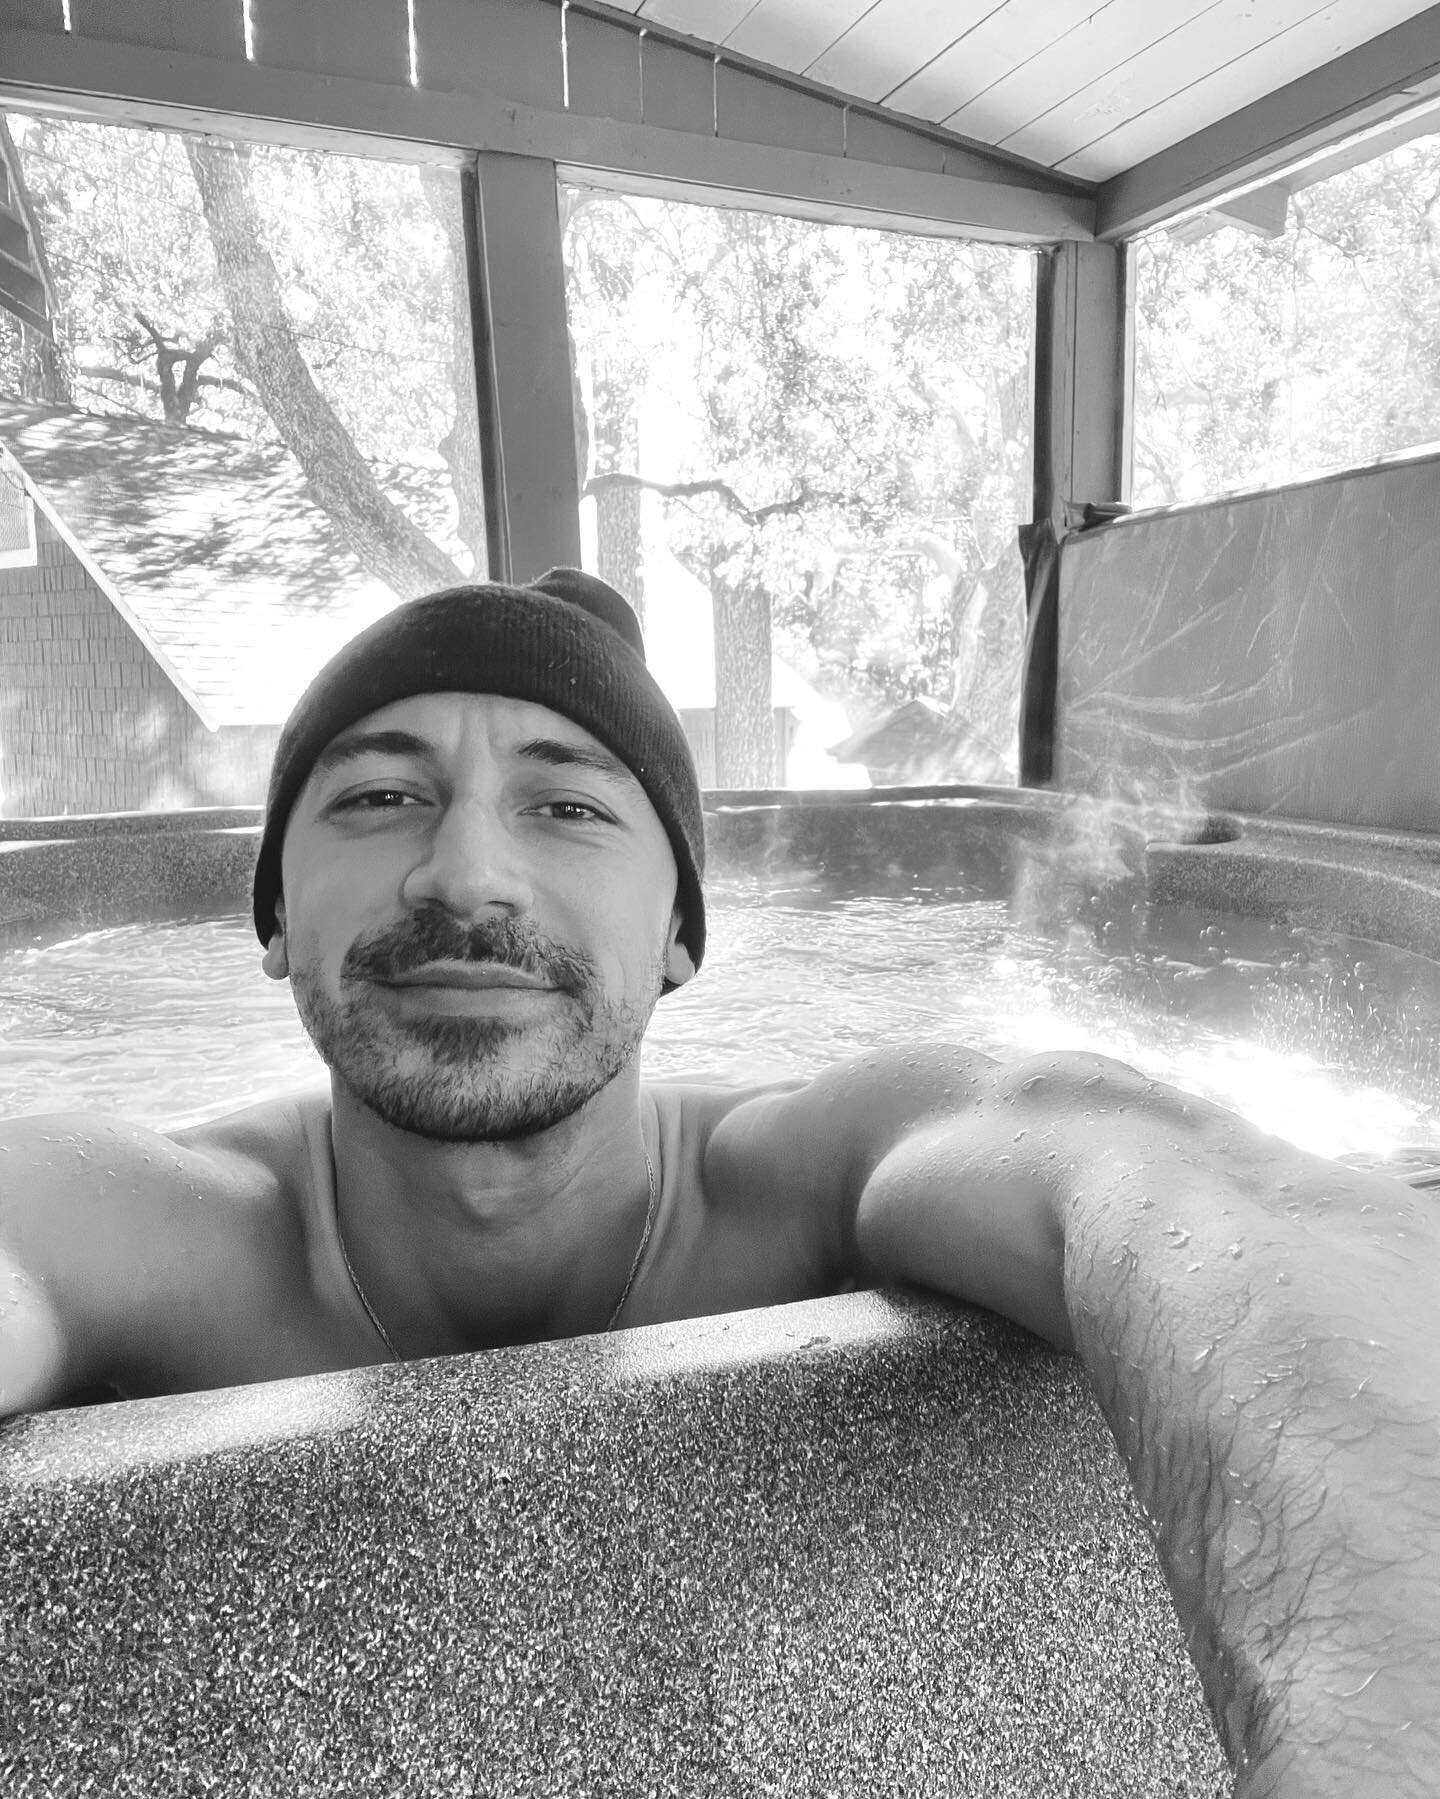 I want to be a hot tub when I grow up.